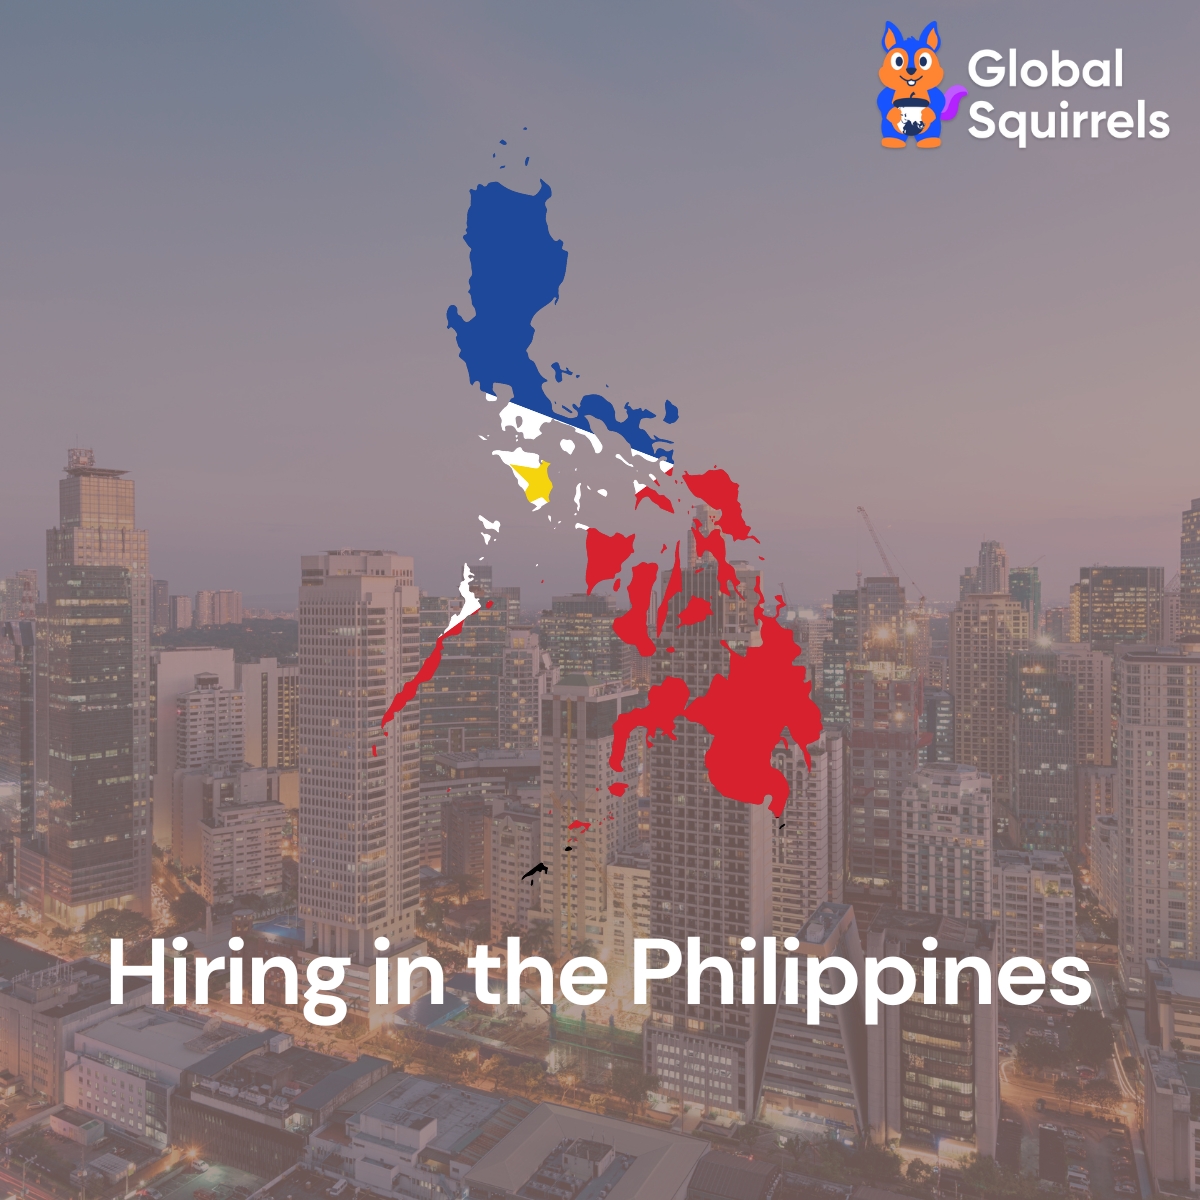 Expand Your Team with Top Talent from the Philippines!
Curious about hiring in the Philippines?

✅ Check it out: globalsquirrels.com/global-hiring-…
📆Schedule a demo : app.globalsquirrels.com/request-demo

#GlobalHiring #Philippines #TalentAcquisition #BusinessGrowth #RemoteWork #Globalsquirrels